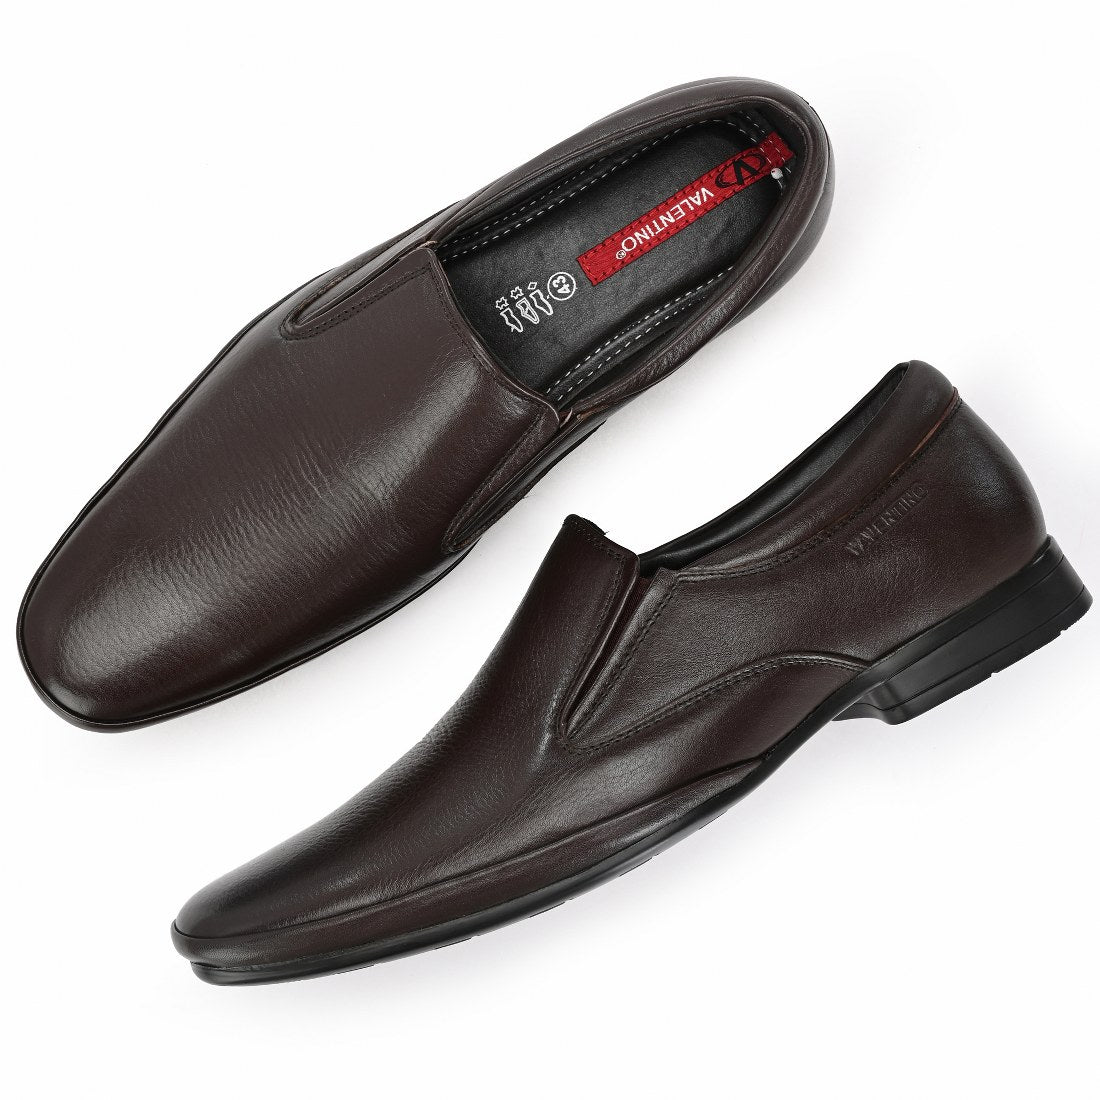 CALIFORNIA-02A MEN LEATHER BROWN FORMAL SLIP ON MOCCASSINS